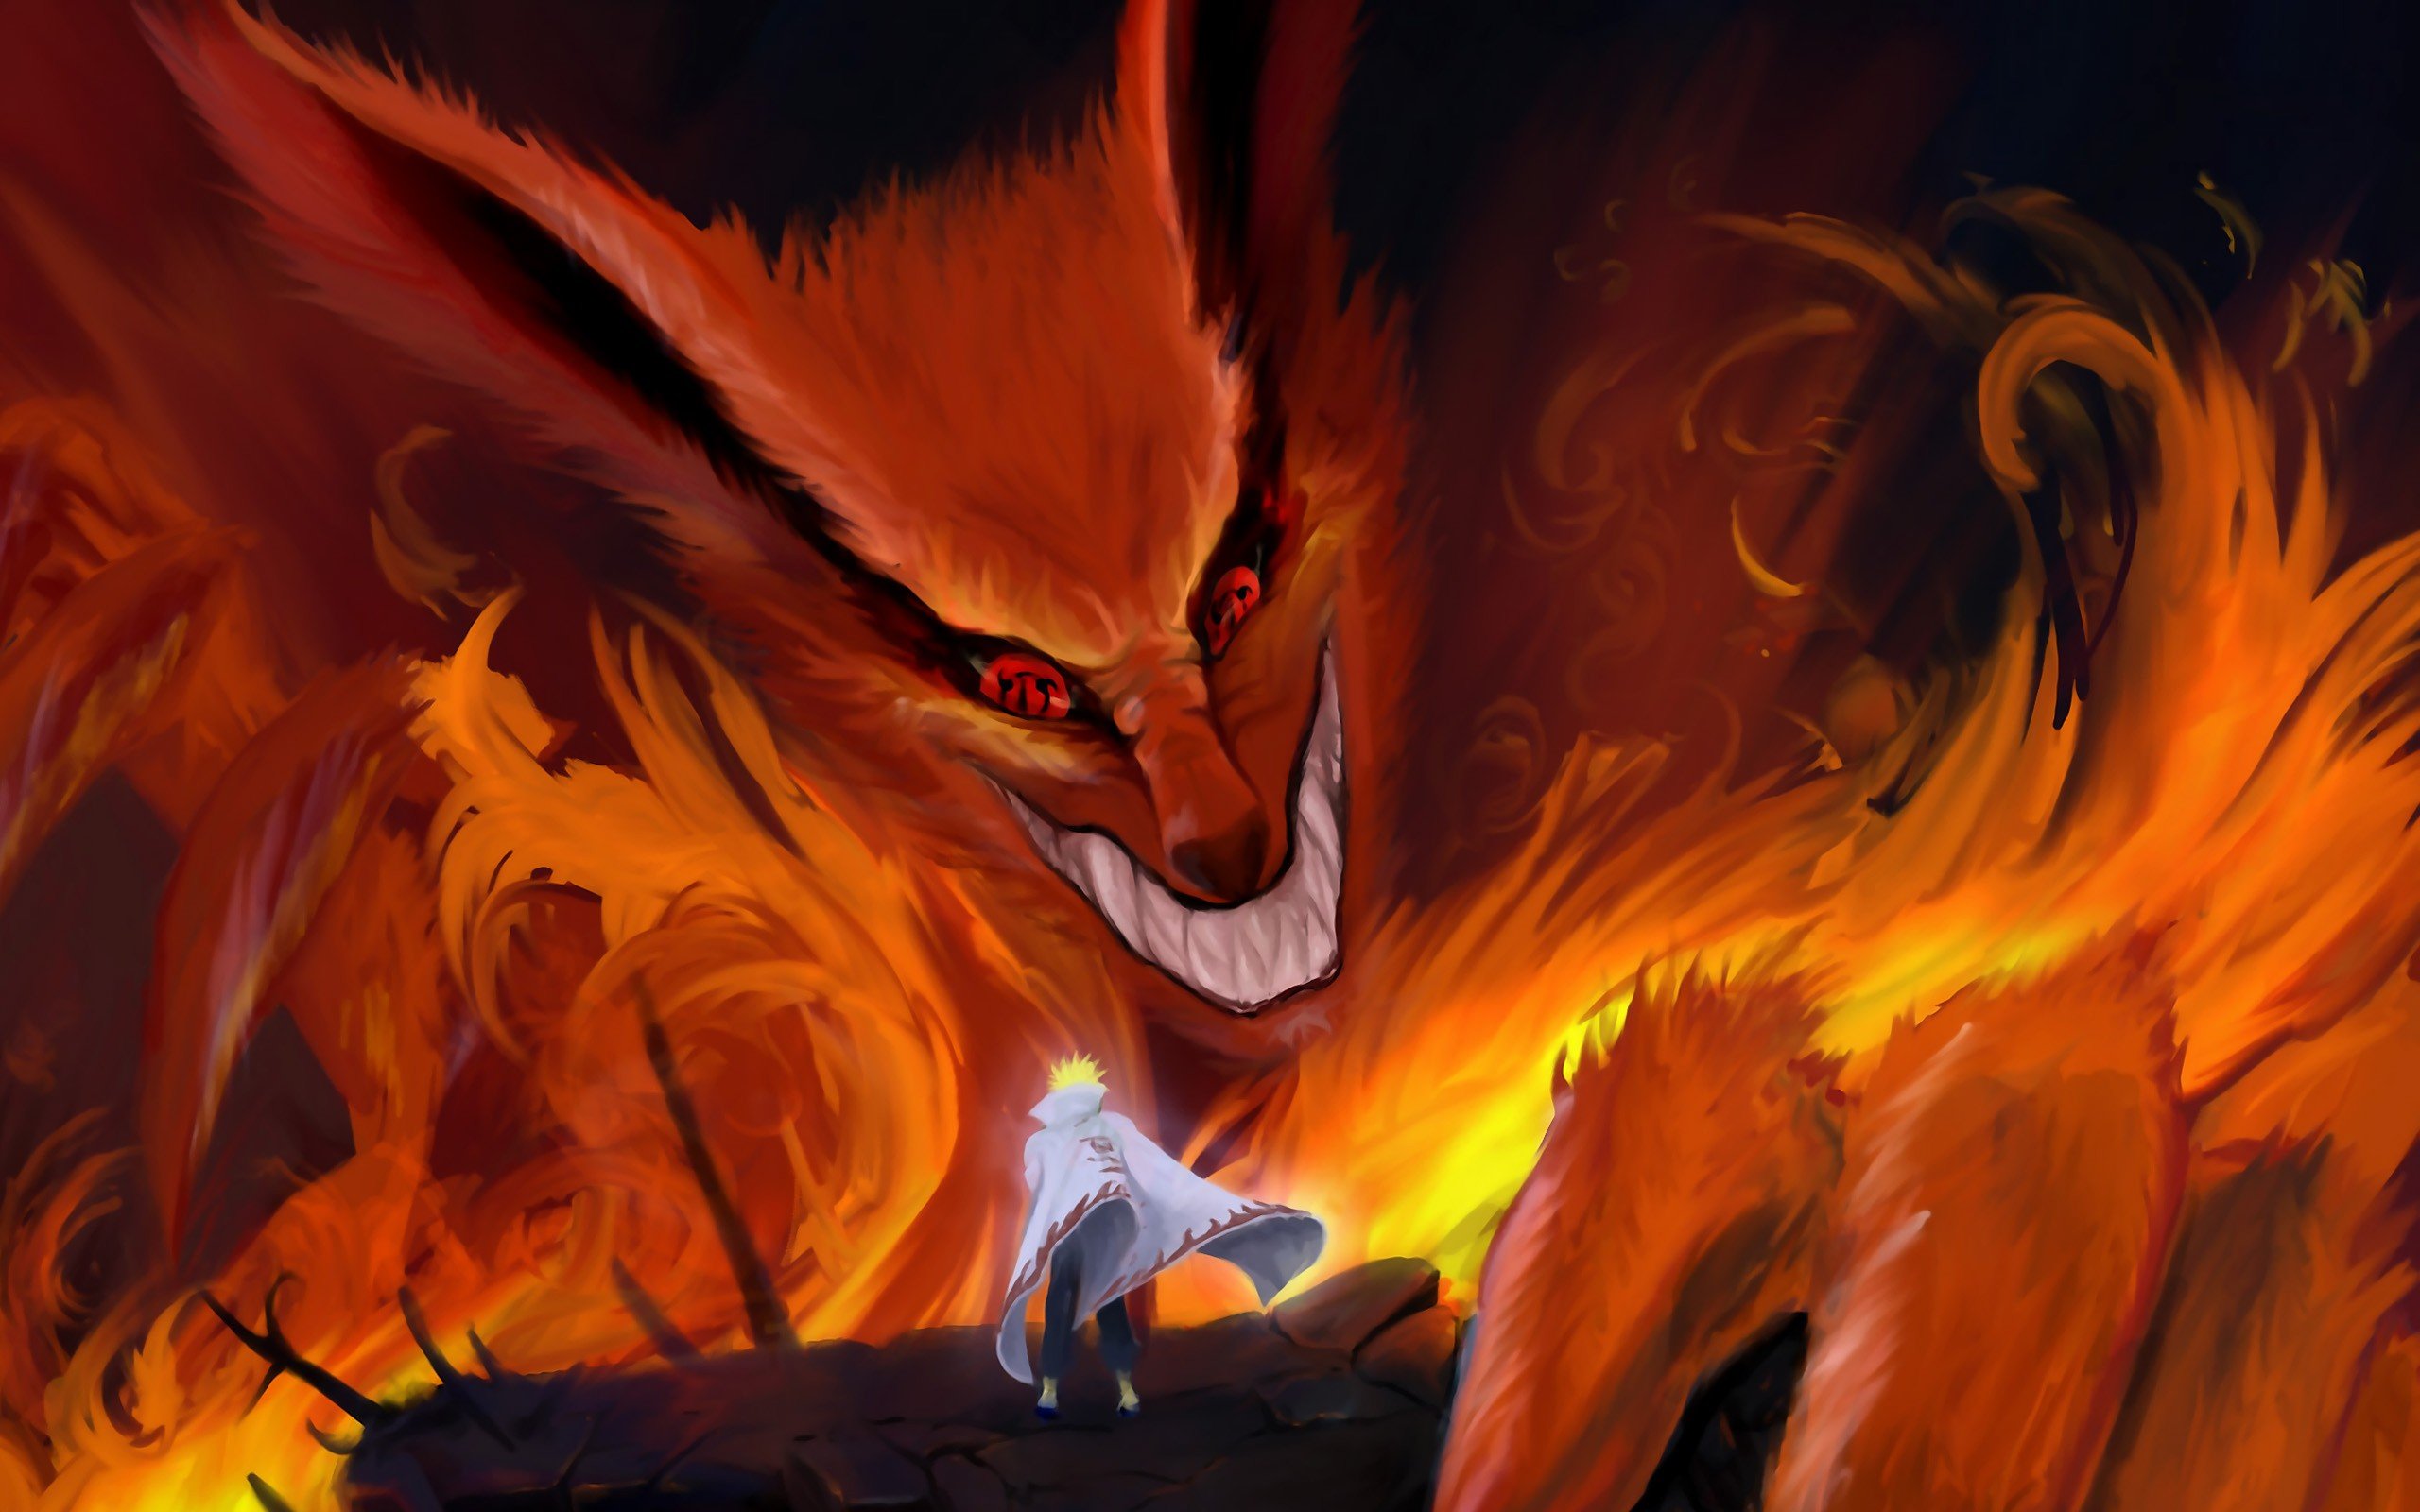 10 Facts About Kurama/Kyuubi You Should Know!!! 